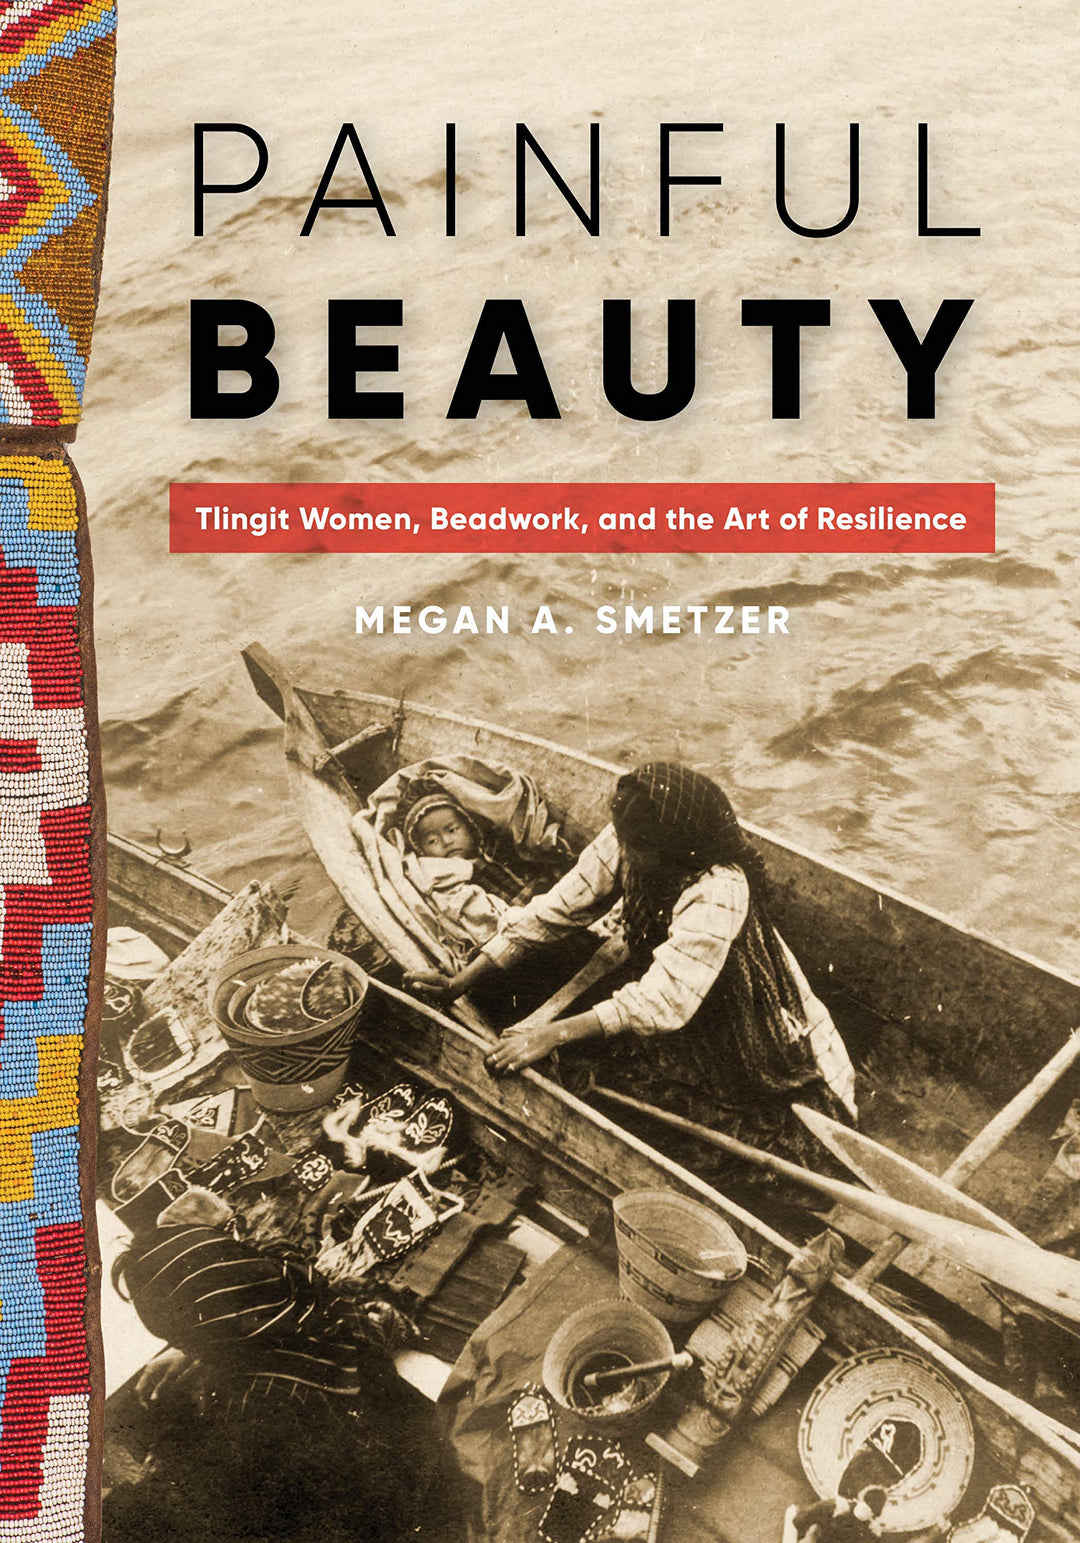 Painful Beauty: Tlingit Women, Beadwork, and the Art of Resilience by Megan Smetzer